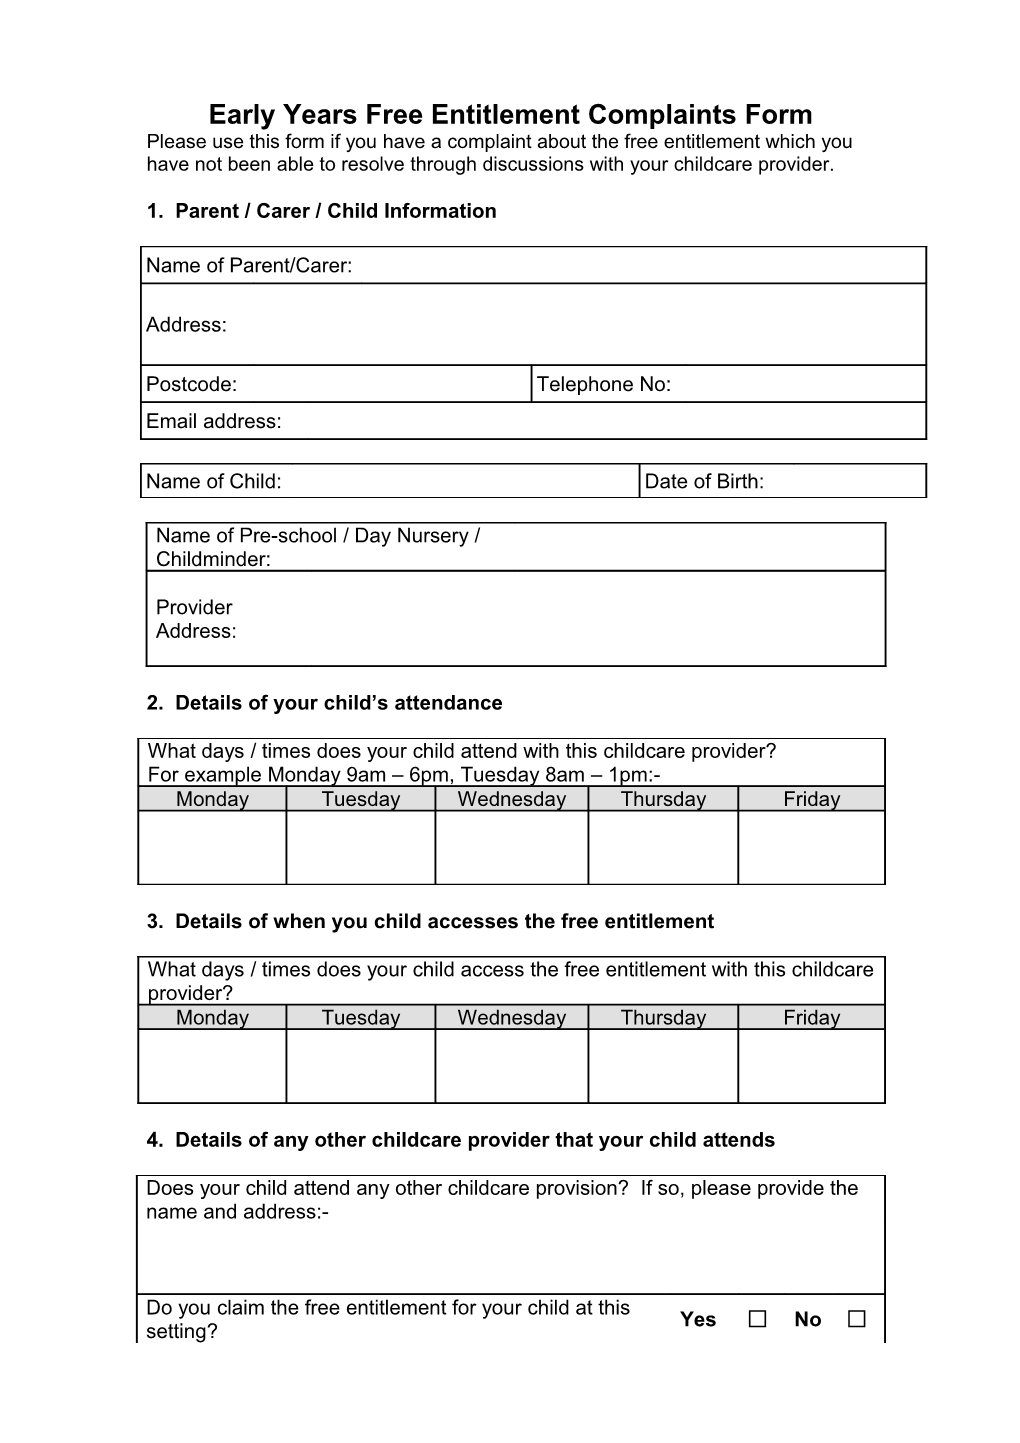 Early Years Free Entitlement Complaints Form